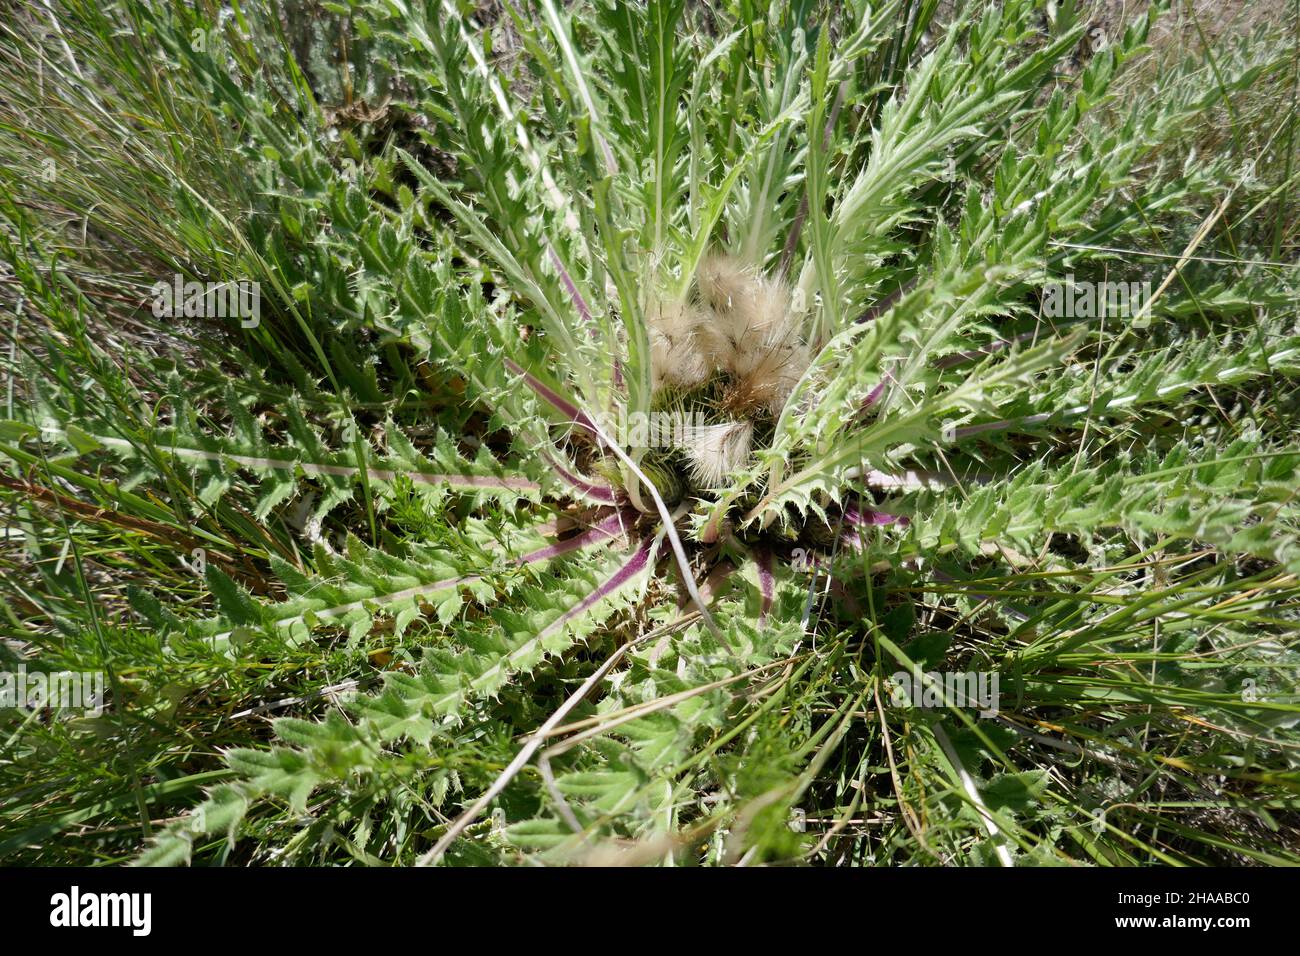 Thistle plant with dried flowers in center Stock Photo